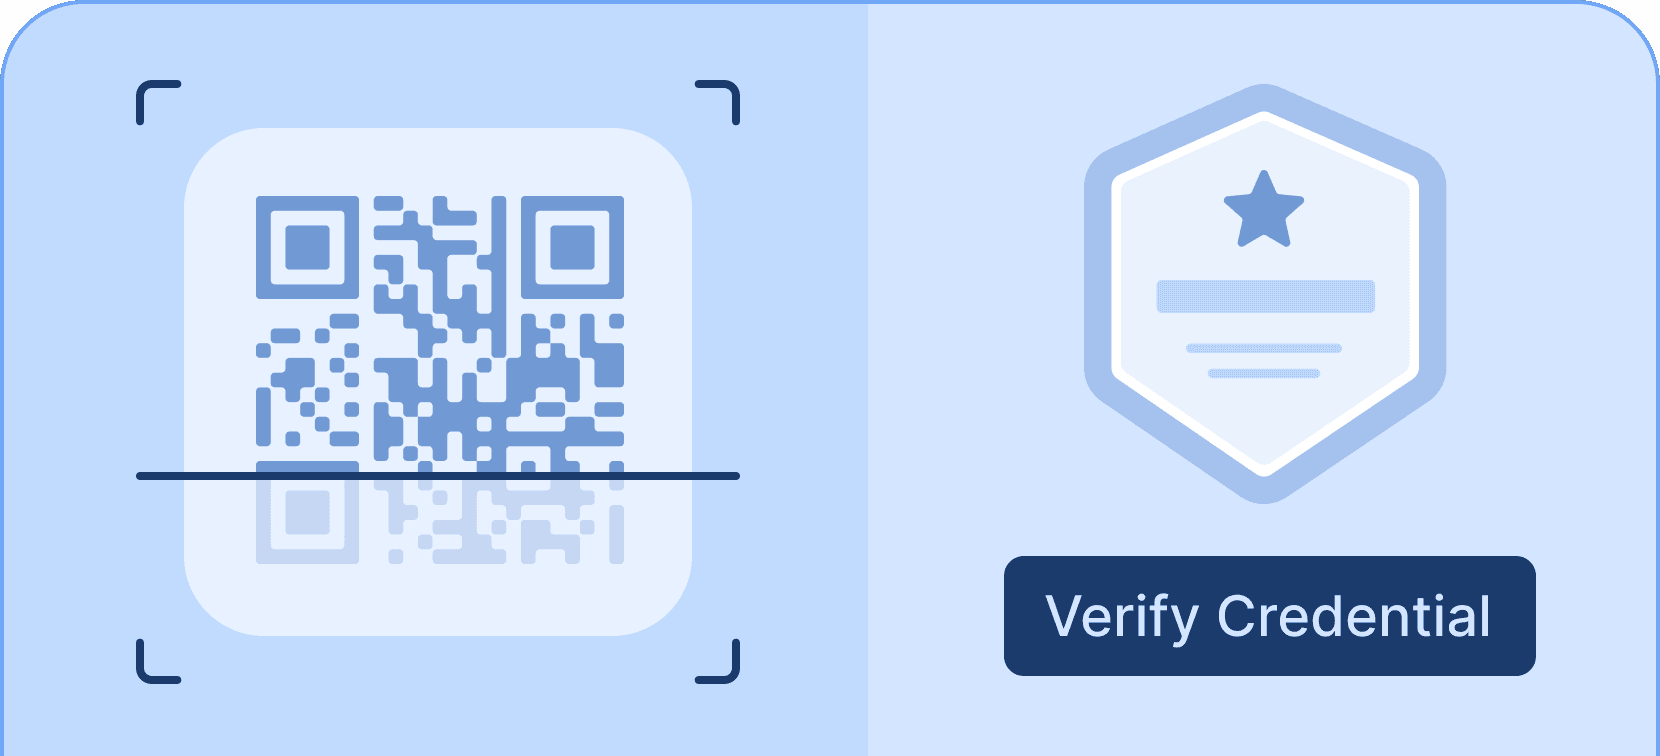 certifier-features-verify-credentials-one-click